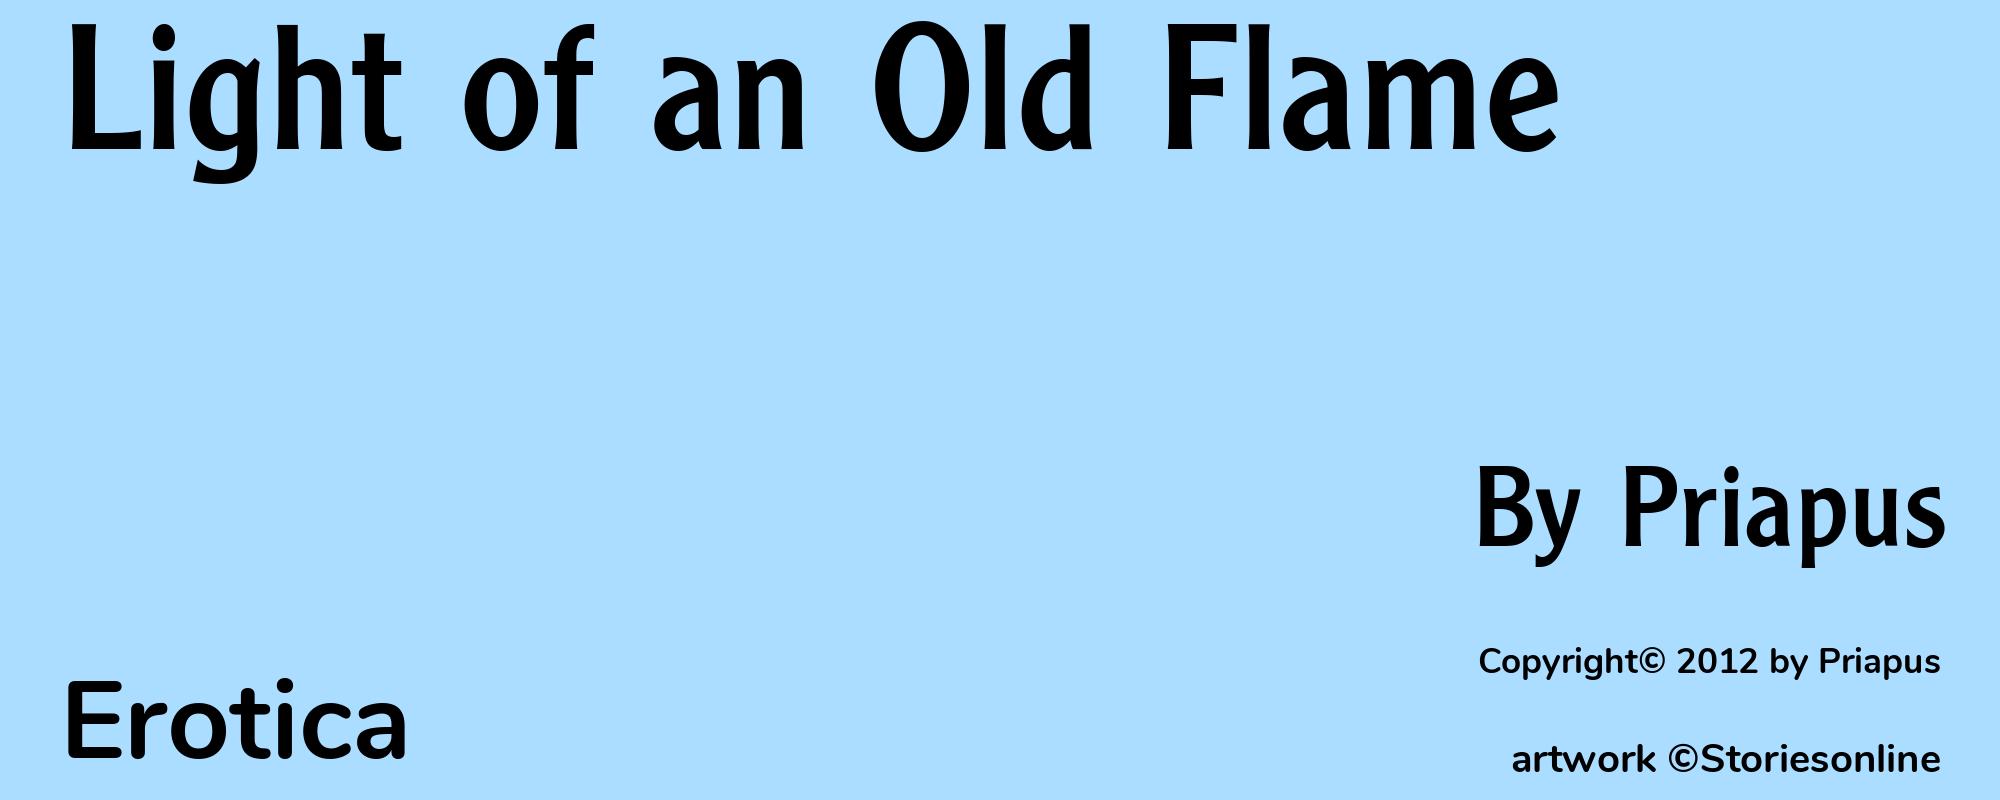 Light of an Old Flame - Cover